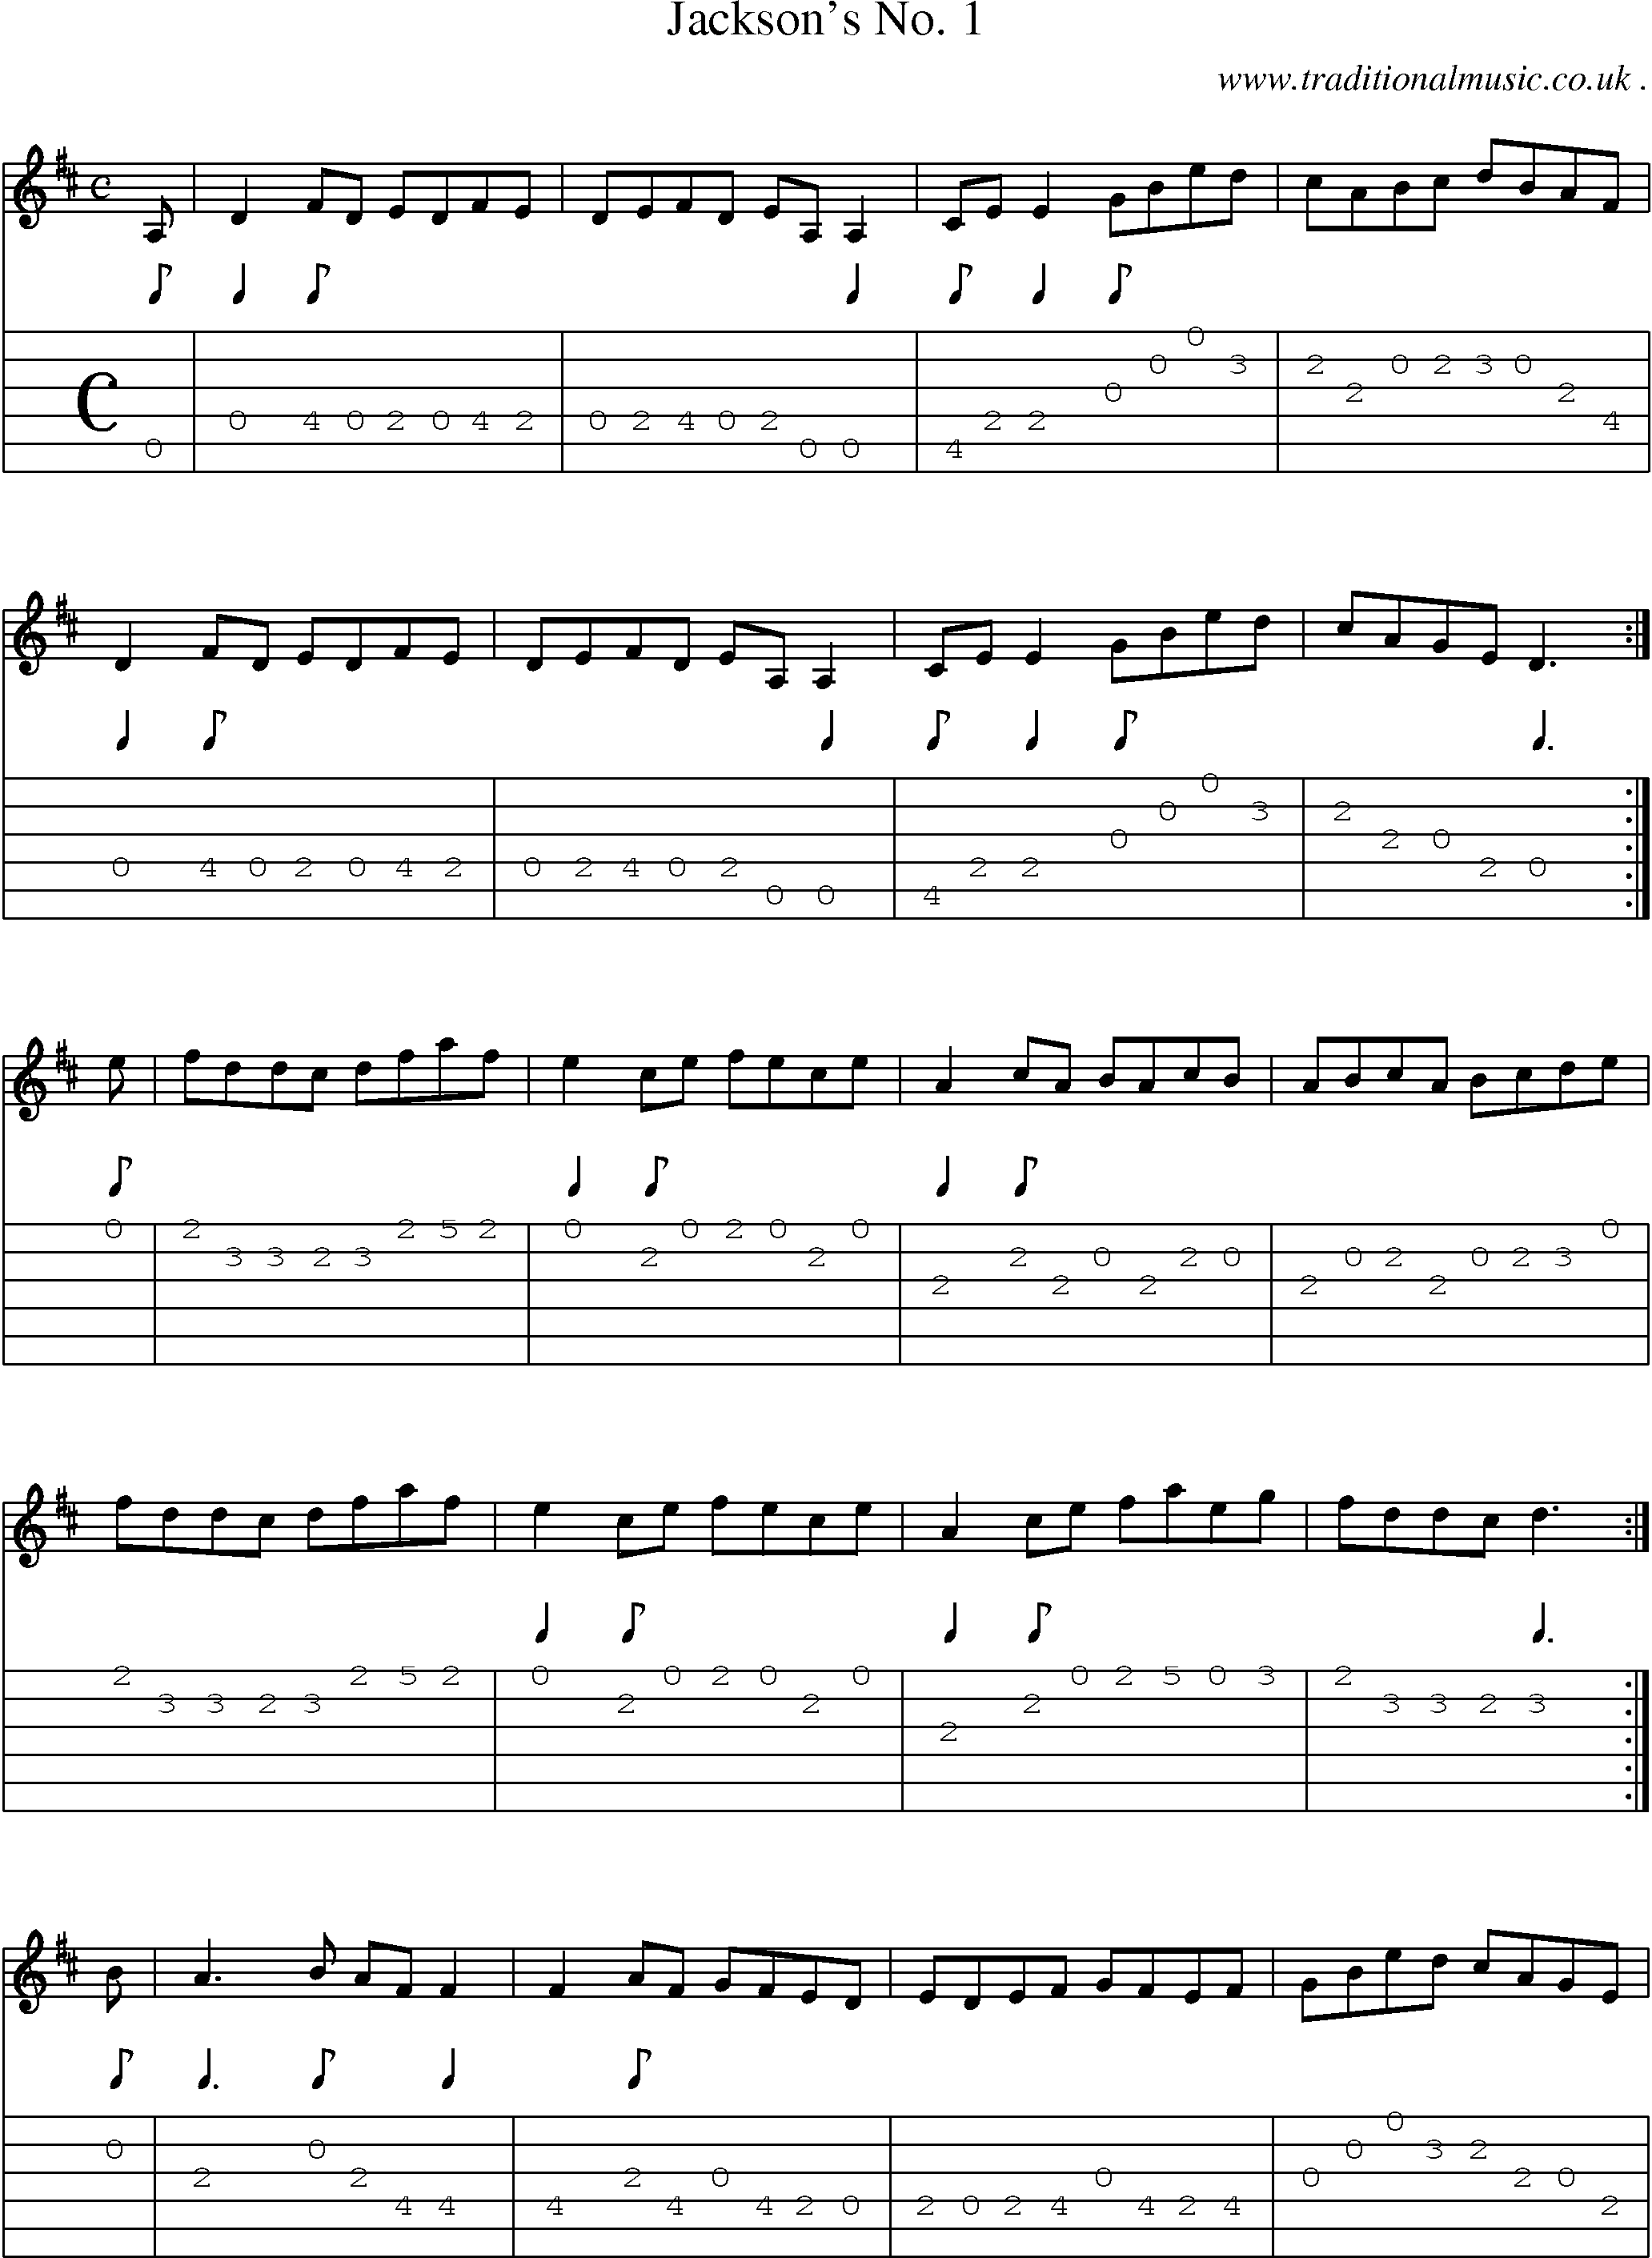 Sheet-Music and Guitar Tabs for Jacksons No 1